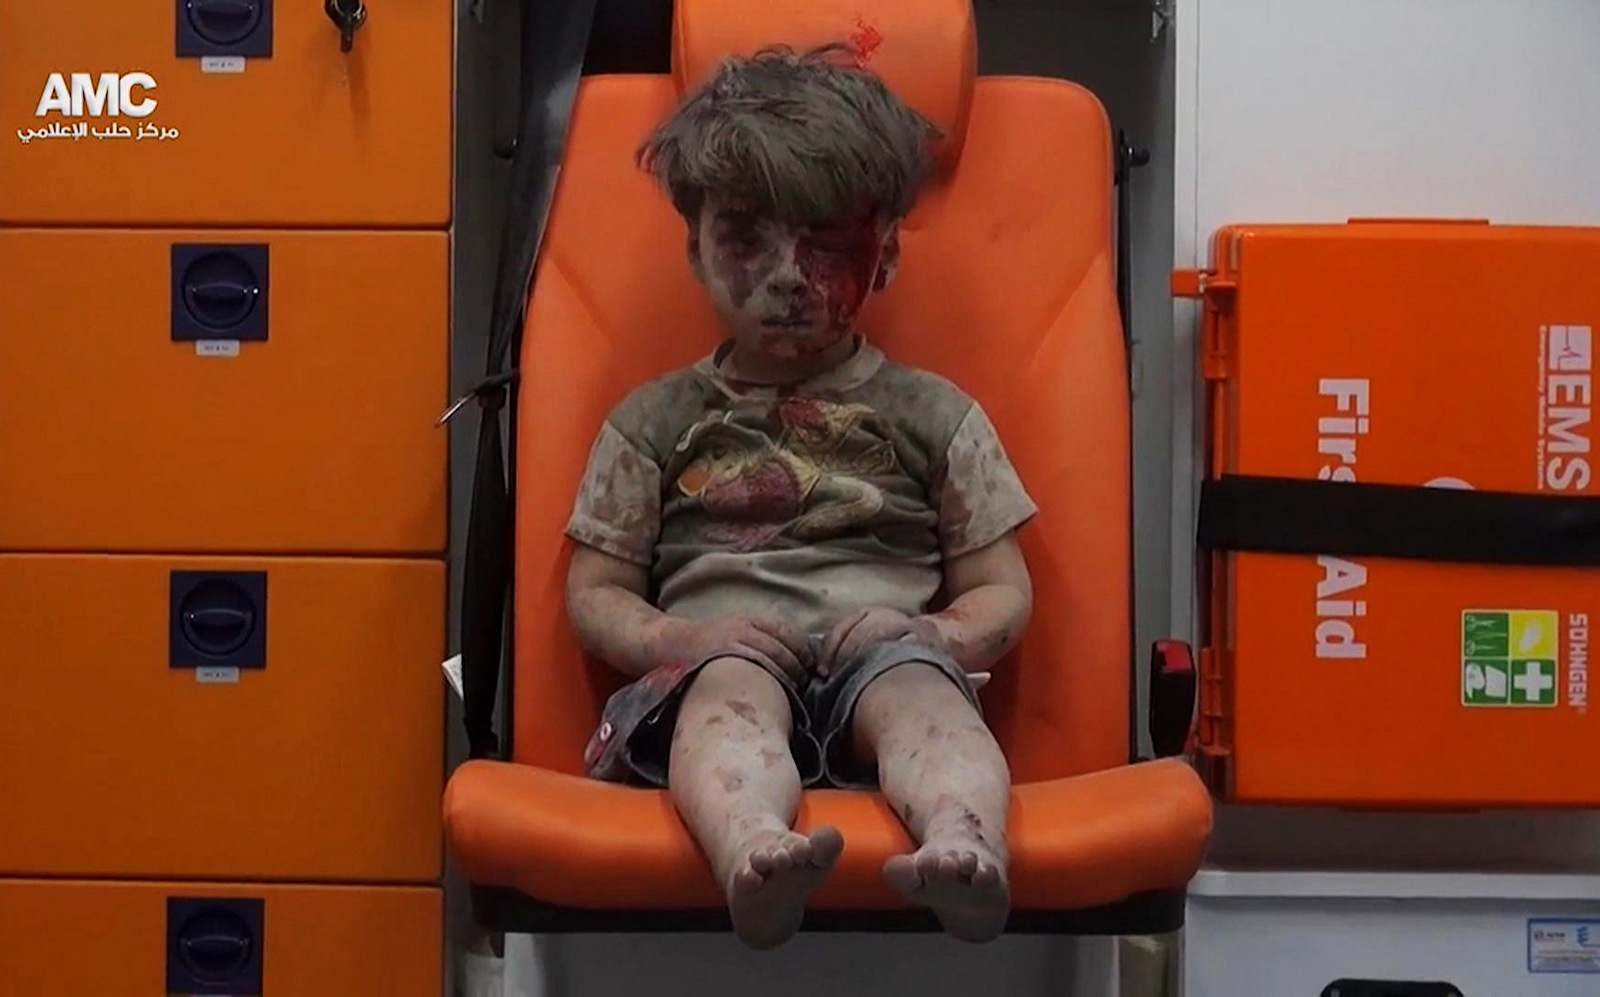 The now infamous photo of Omran Daqneesh as he sits in an ambulance in Aleppo, Syria.